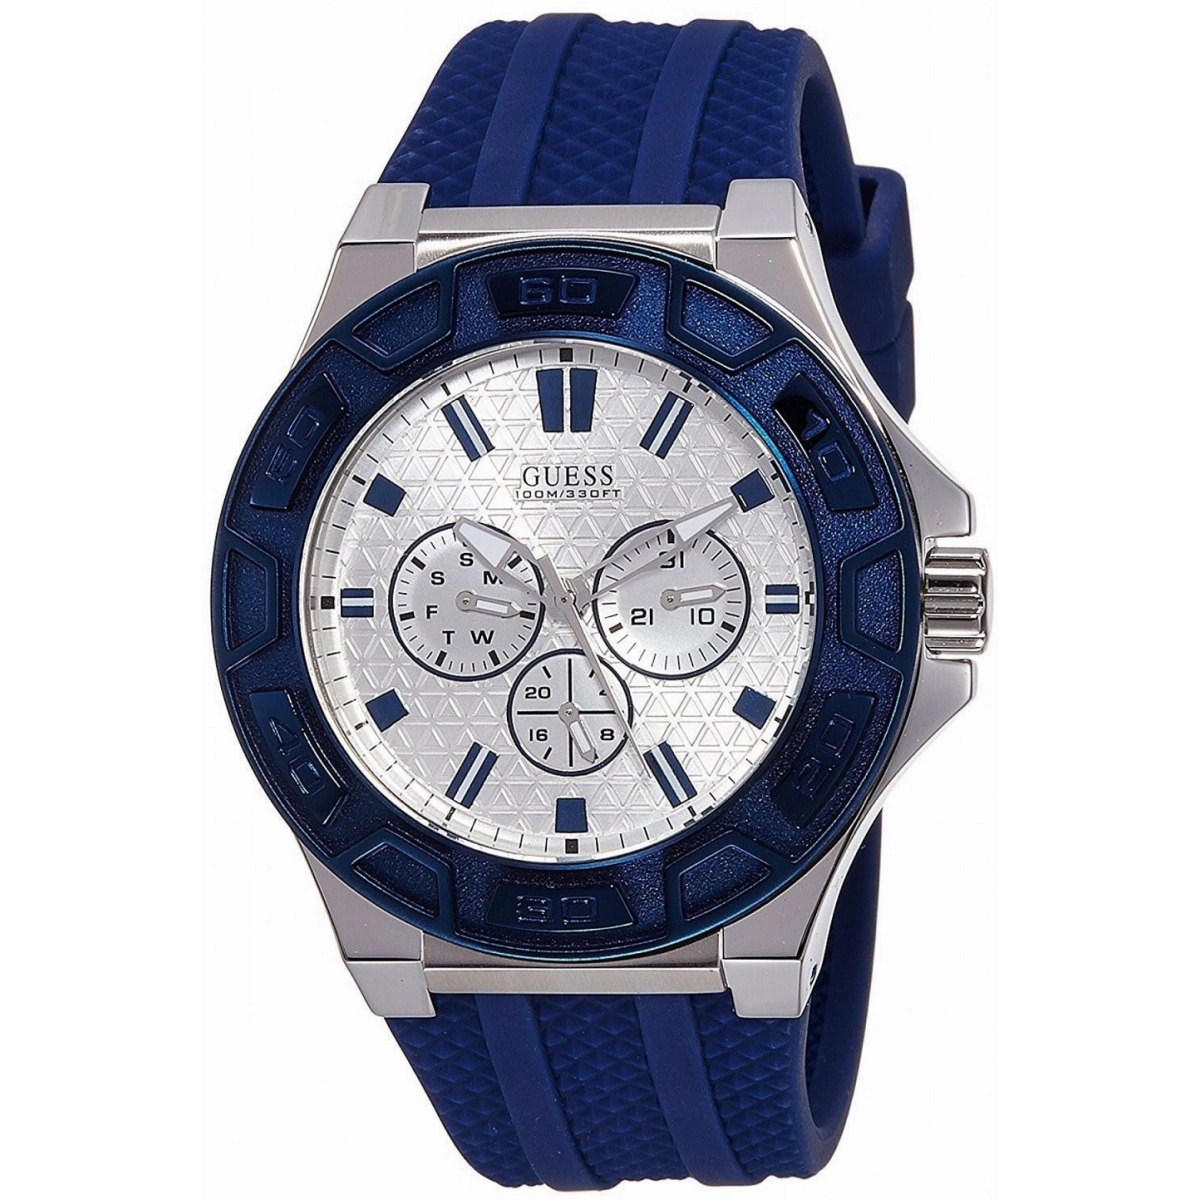 MONTRE HOMME GUESS W0674G4